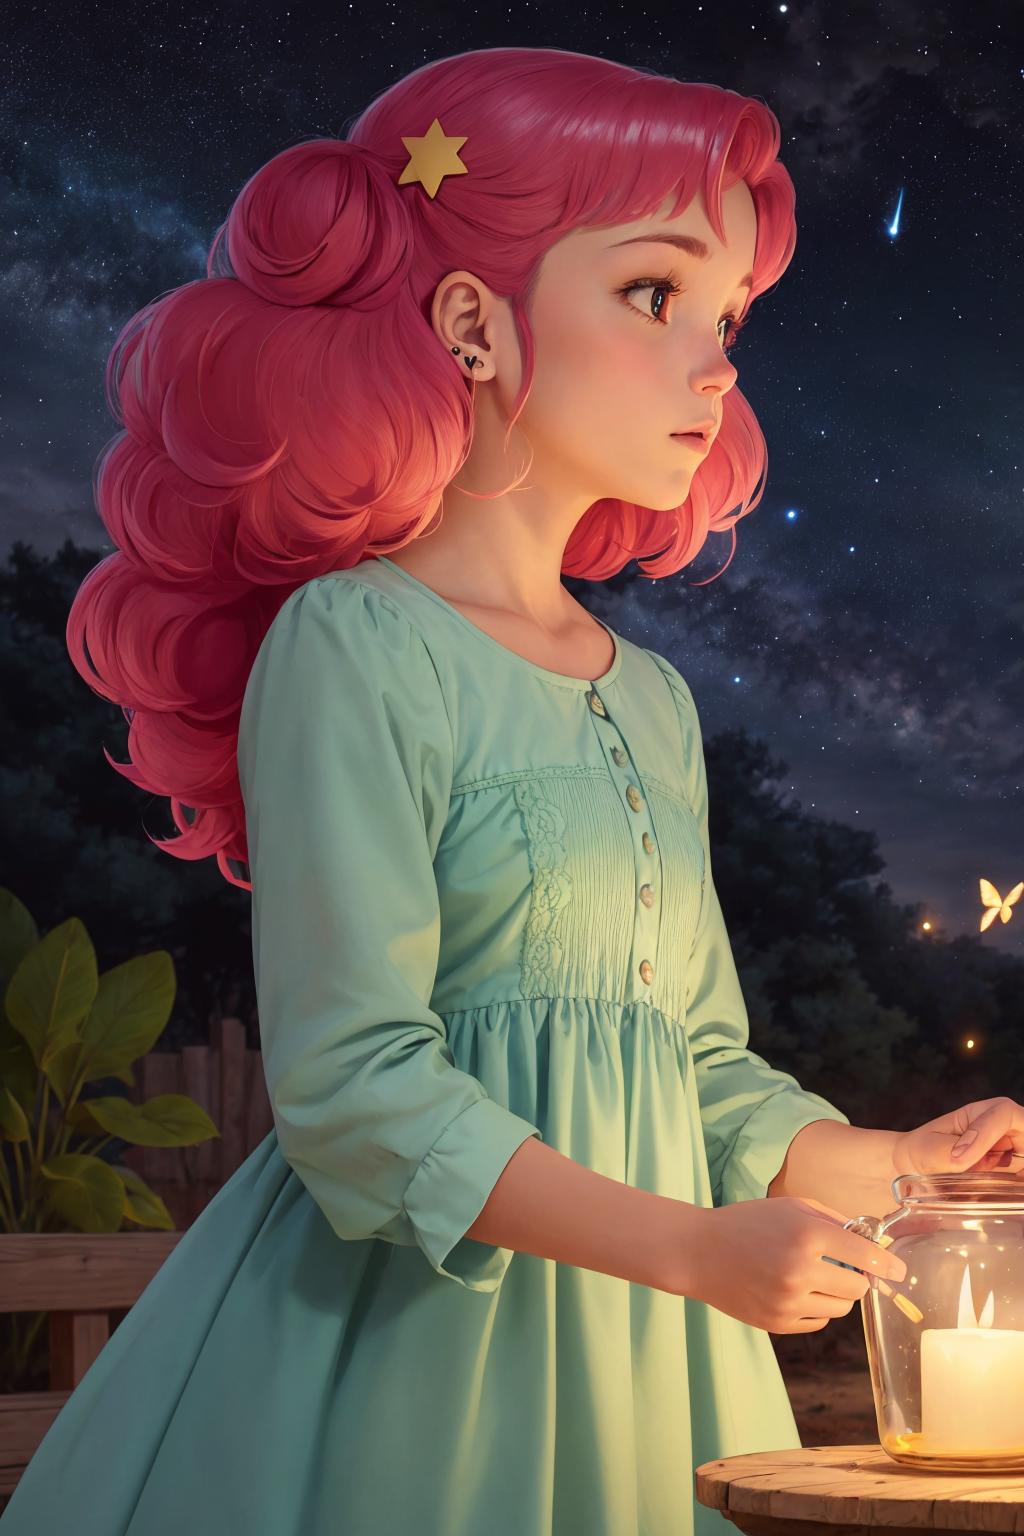 A Pink-Haired Girl in a Blue Dress Staring at the Stars at Night.